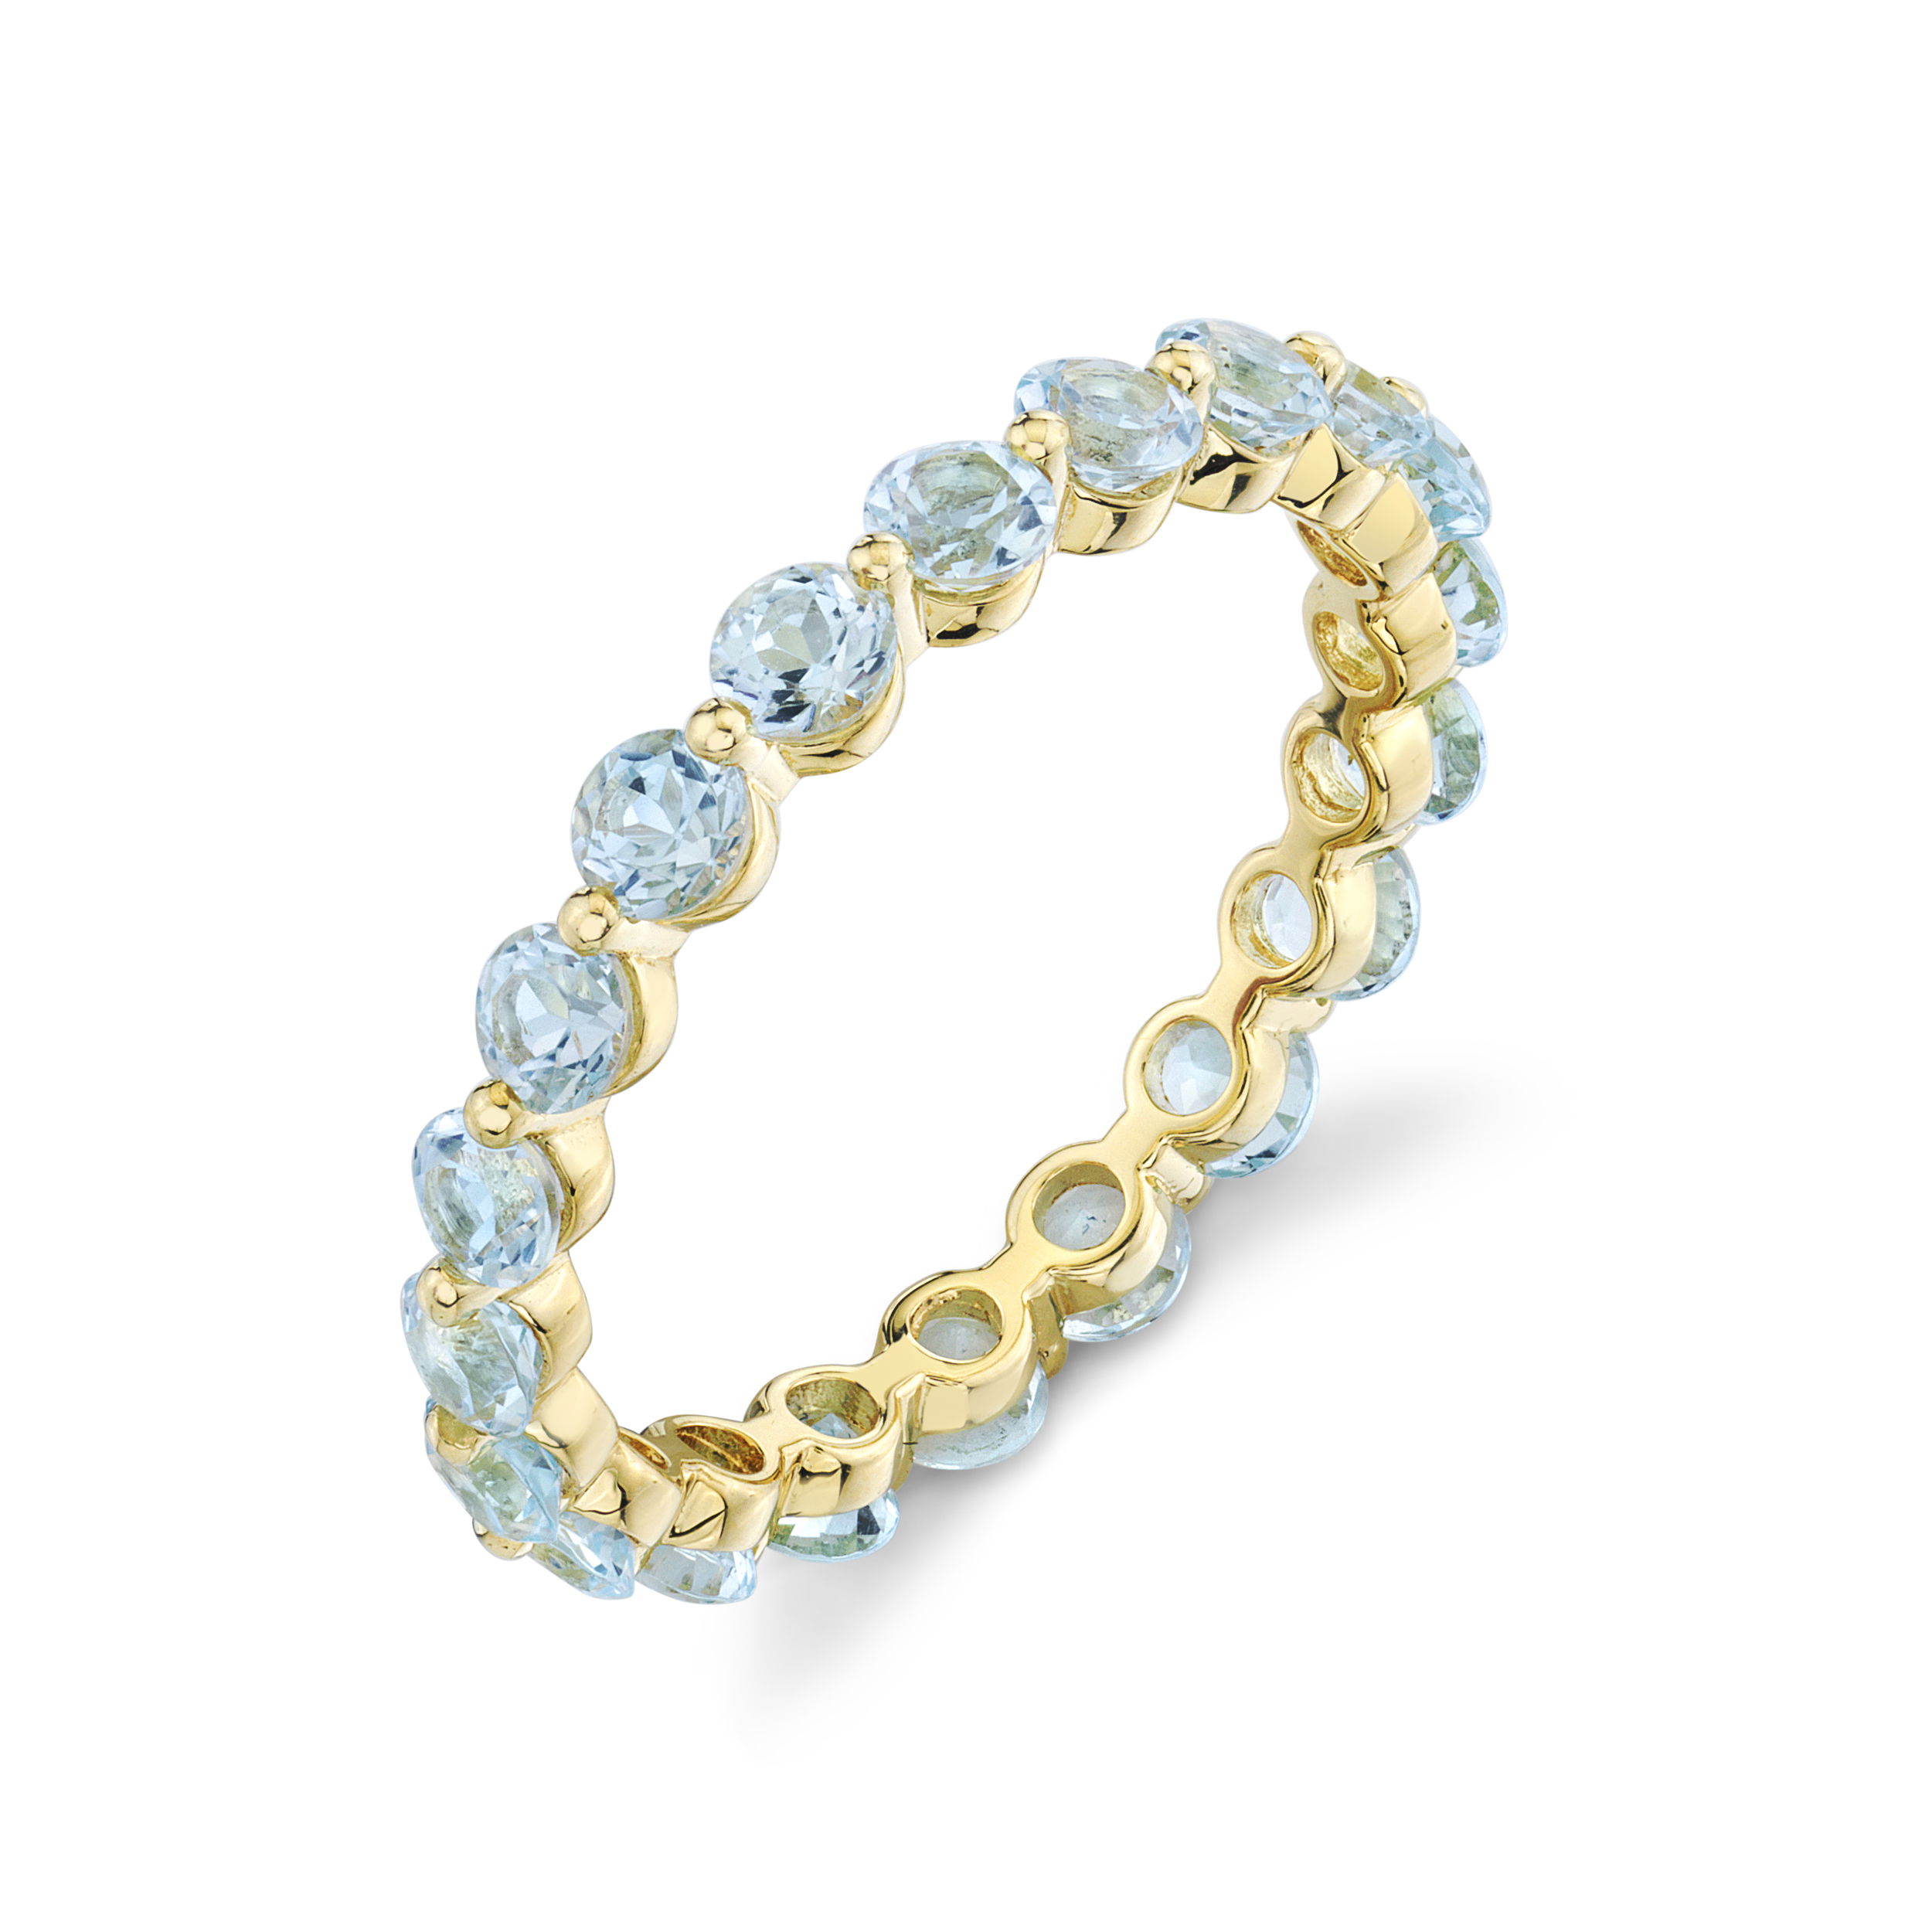 Eternity Stacking Band Ring 2.8mm with Sky Blue Topaz and Prong Spacers in 18kt Yellow Gold